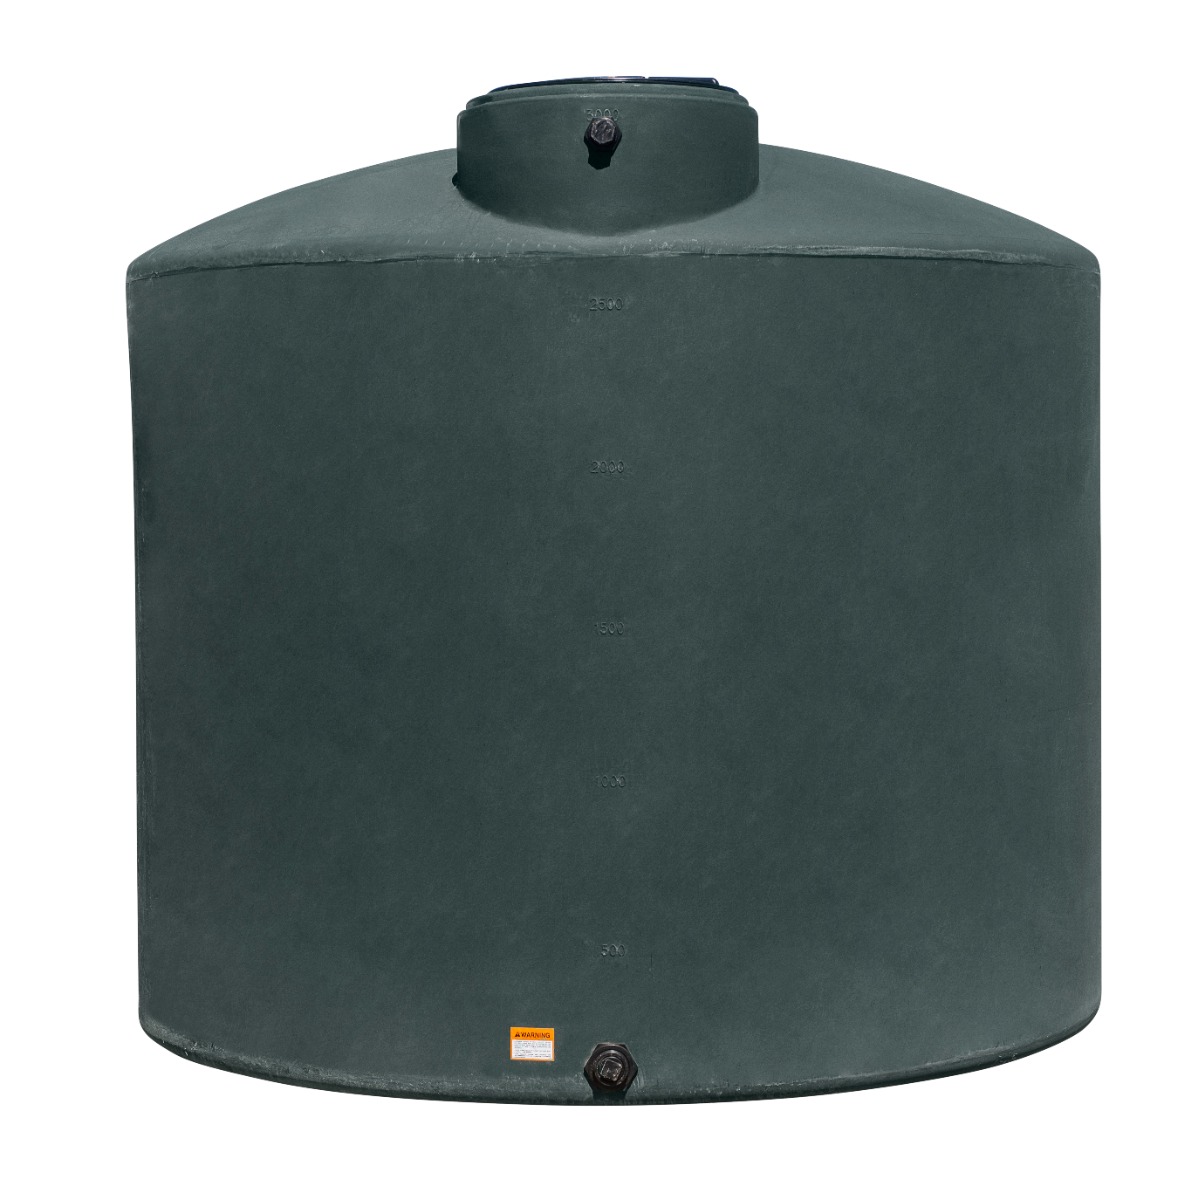 Buy 5000 Gallon Plastic Vertical Water Storage Tank without Fittings in Green by Norwesco of Green color for only $5,136.00